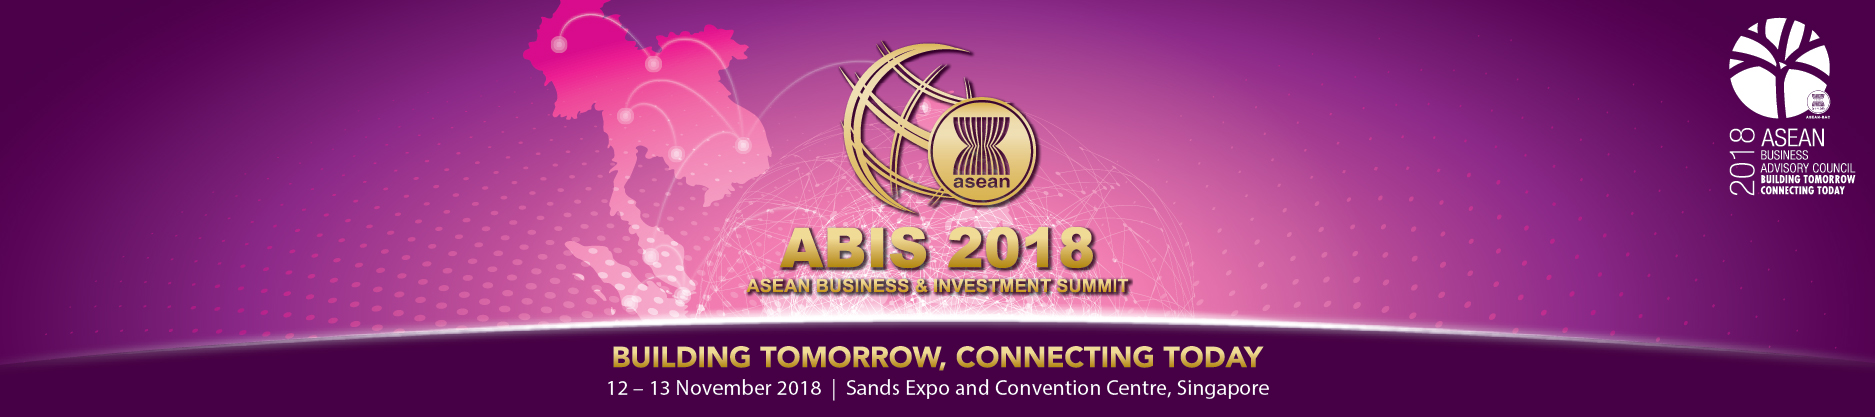 ASEAN Business Awards and ASEAN Business & Investment Summit 2018